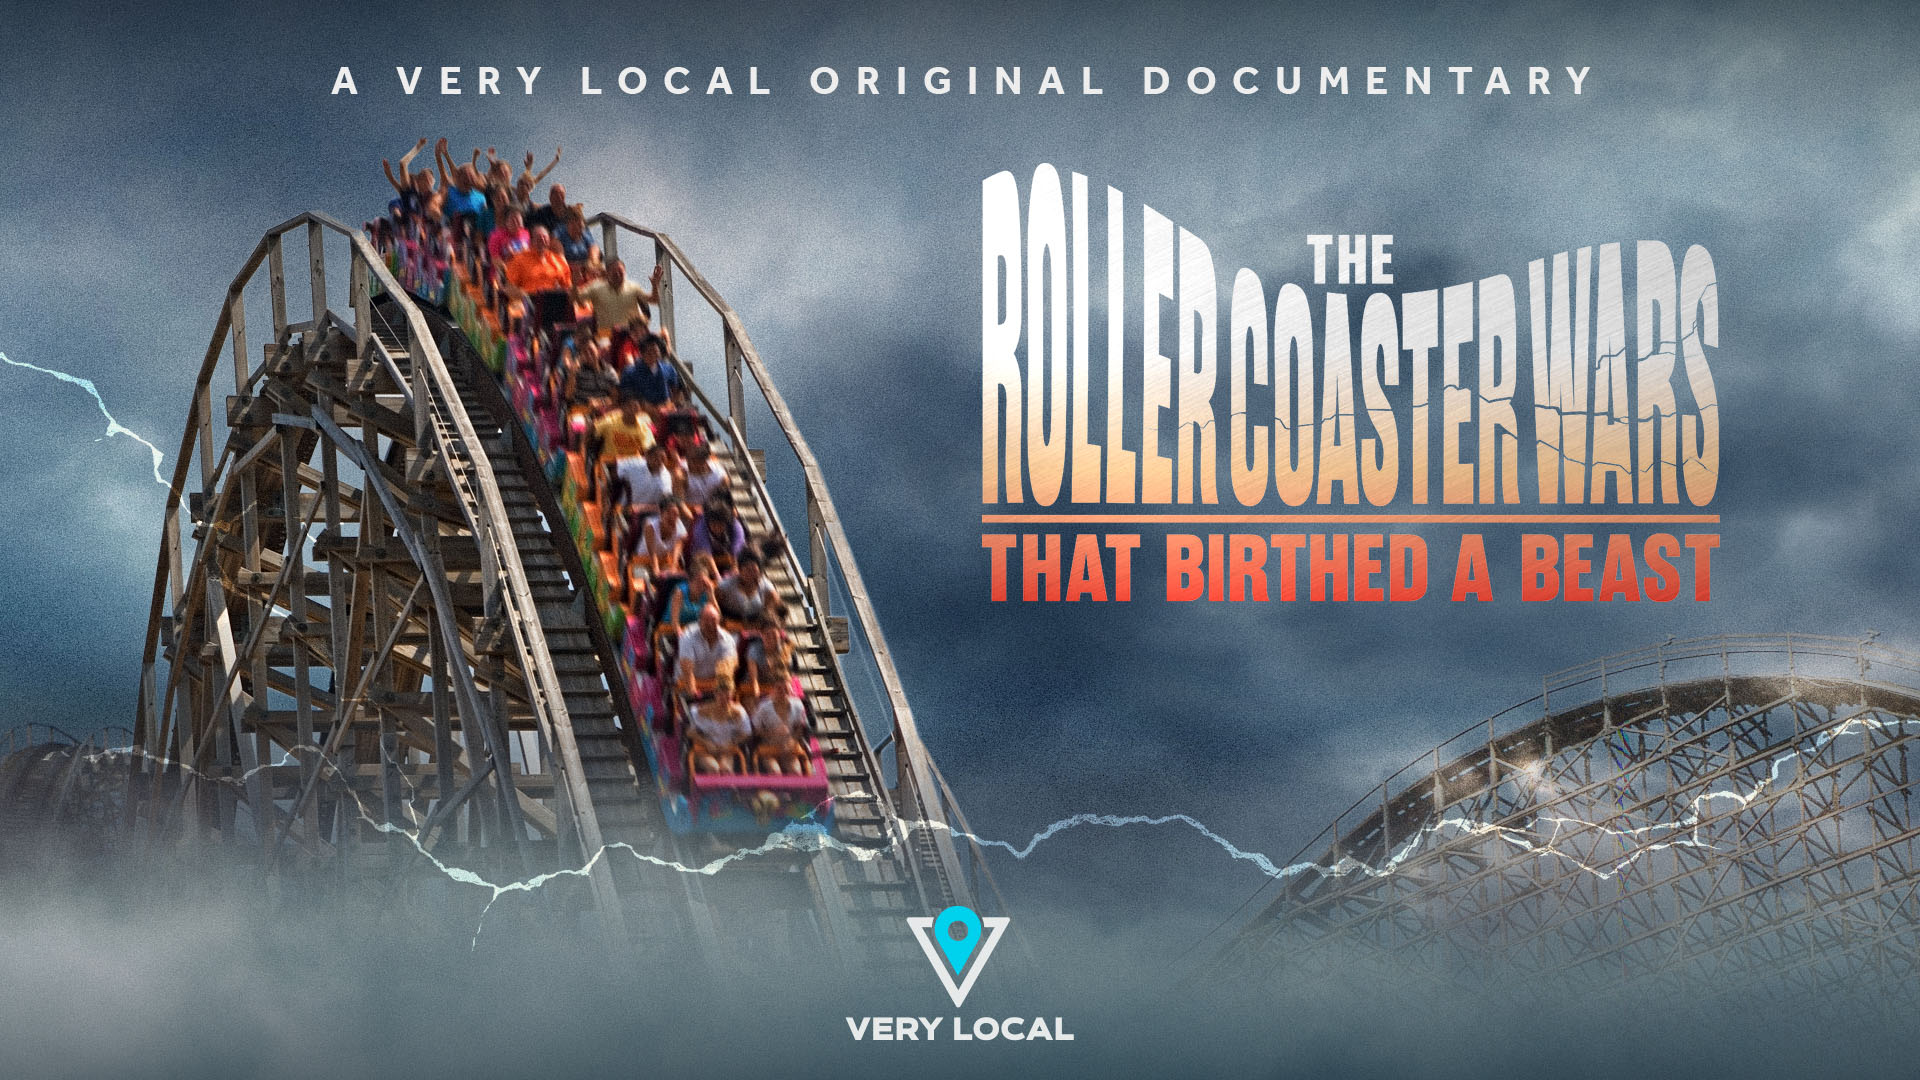 The Roller Coaster Wars that Birthed a Beast documentary. 